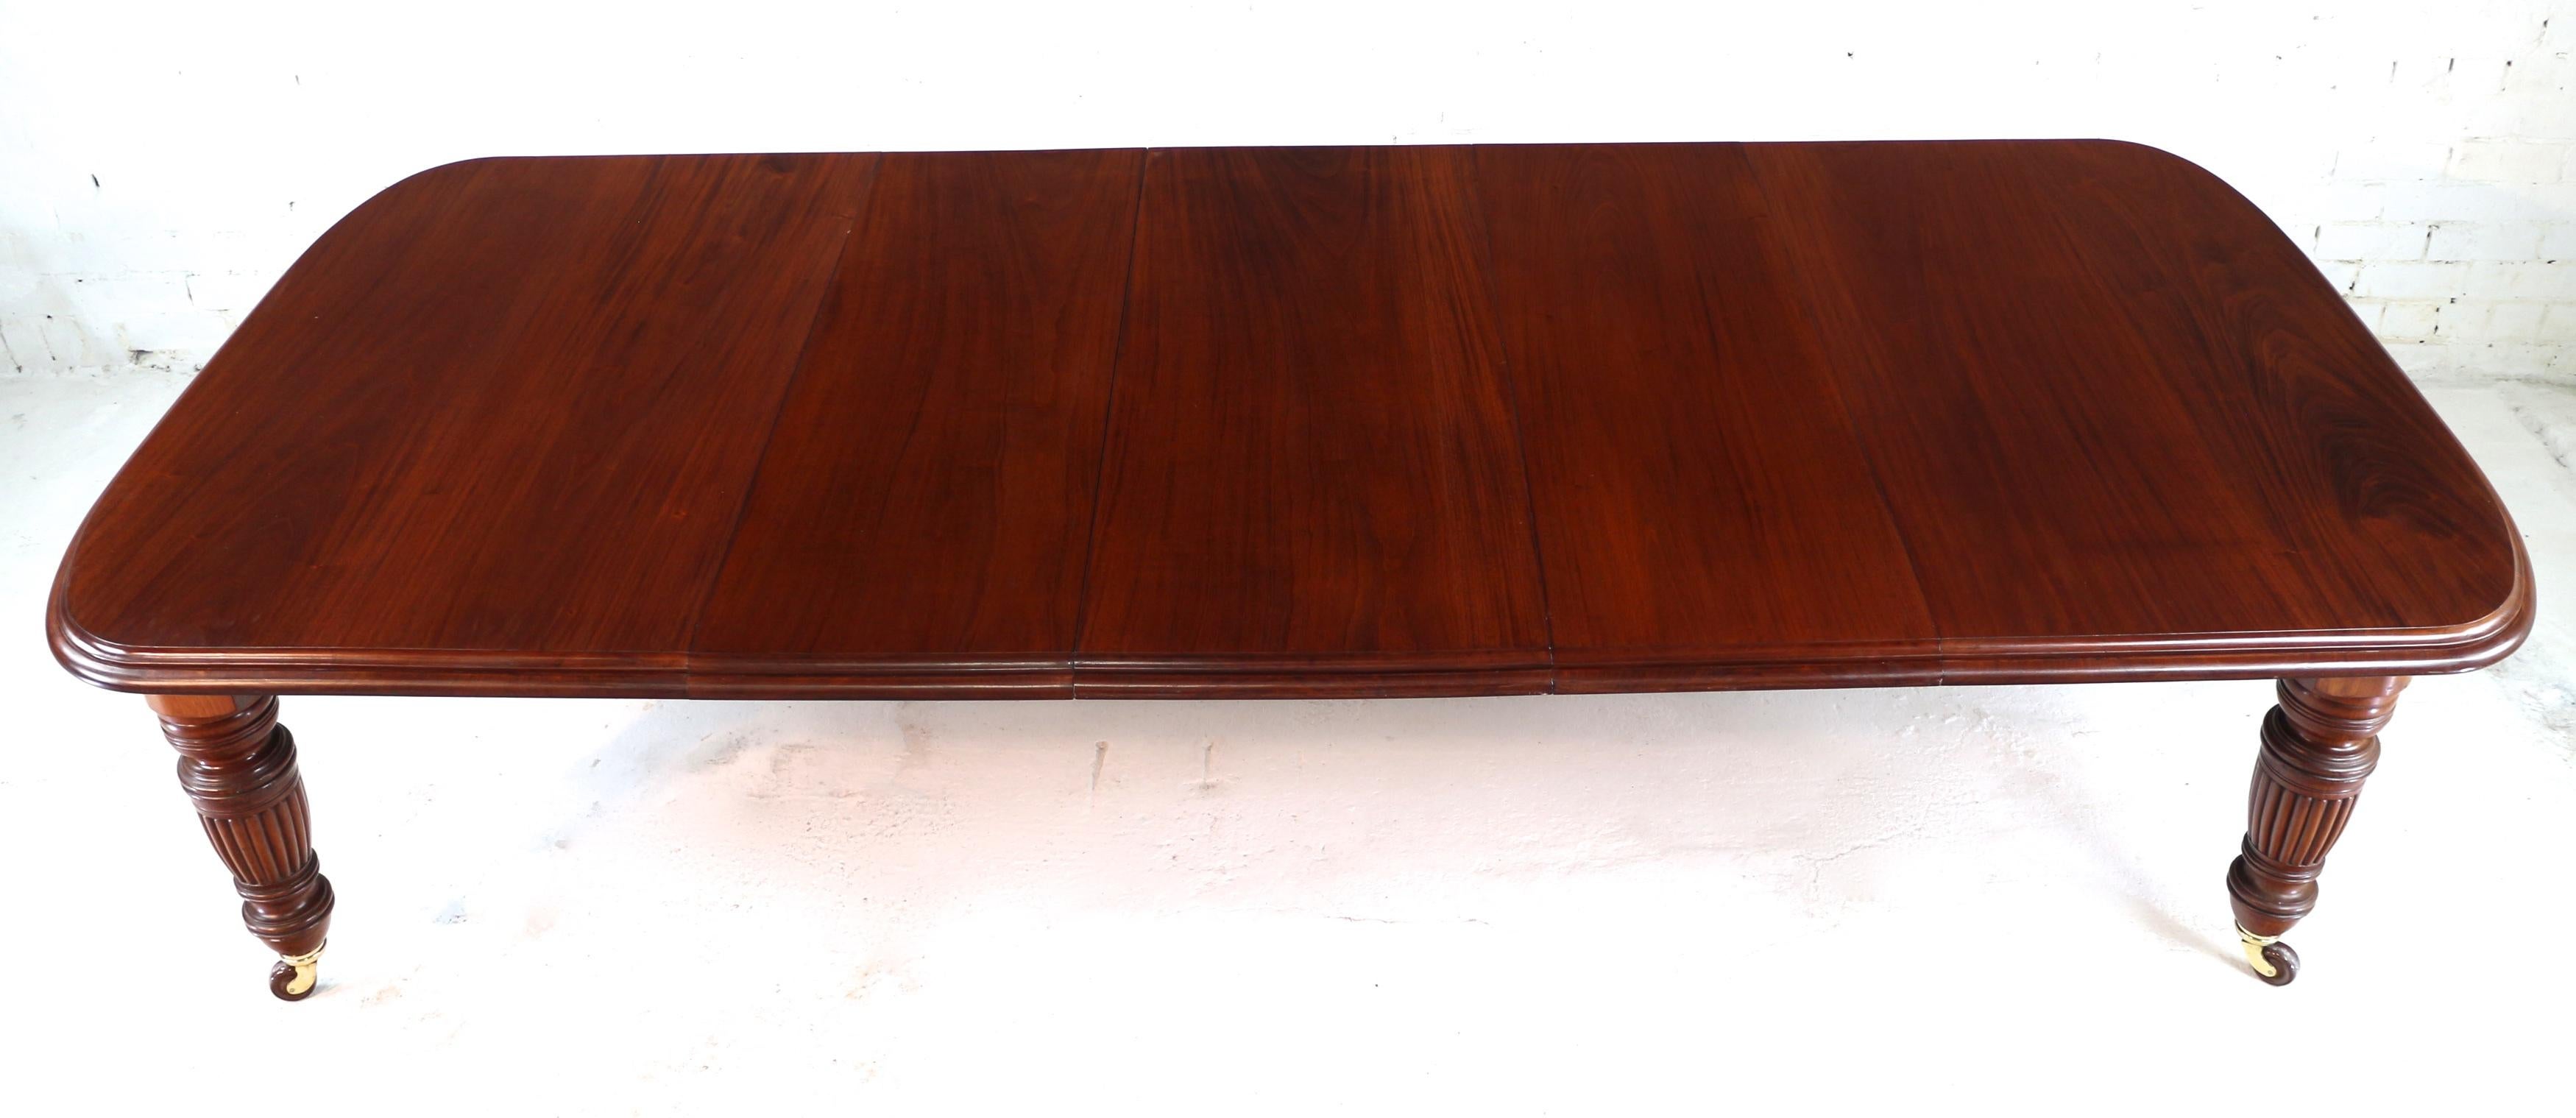 British Antique English Victorian Mahogany Extending Dining Table & 3 Leaves, Seats 12 For Sale